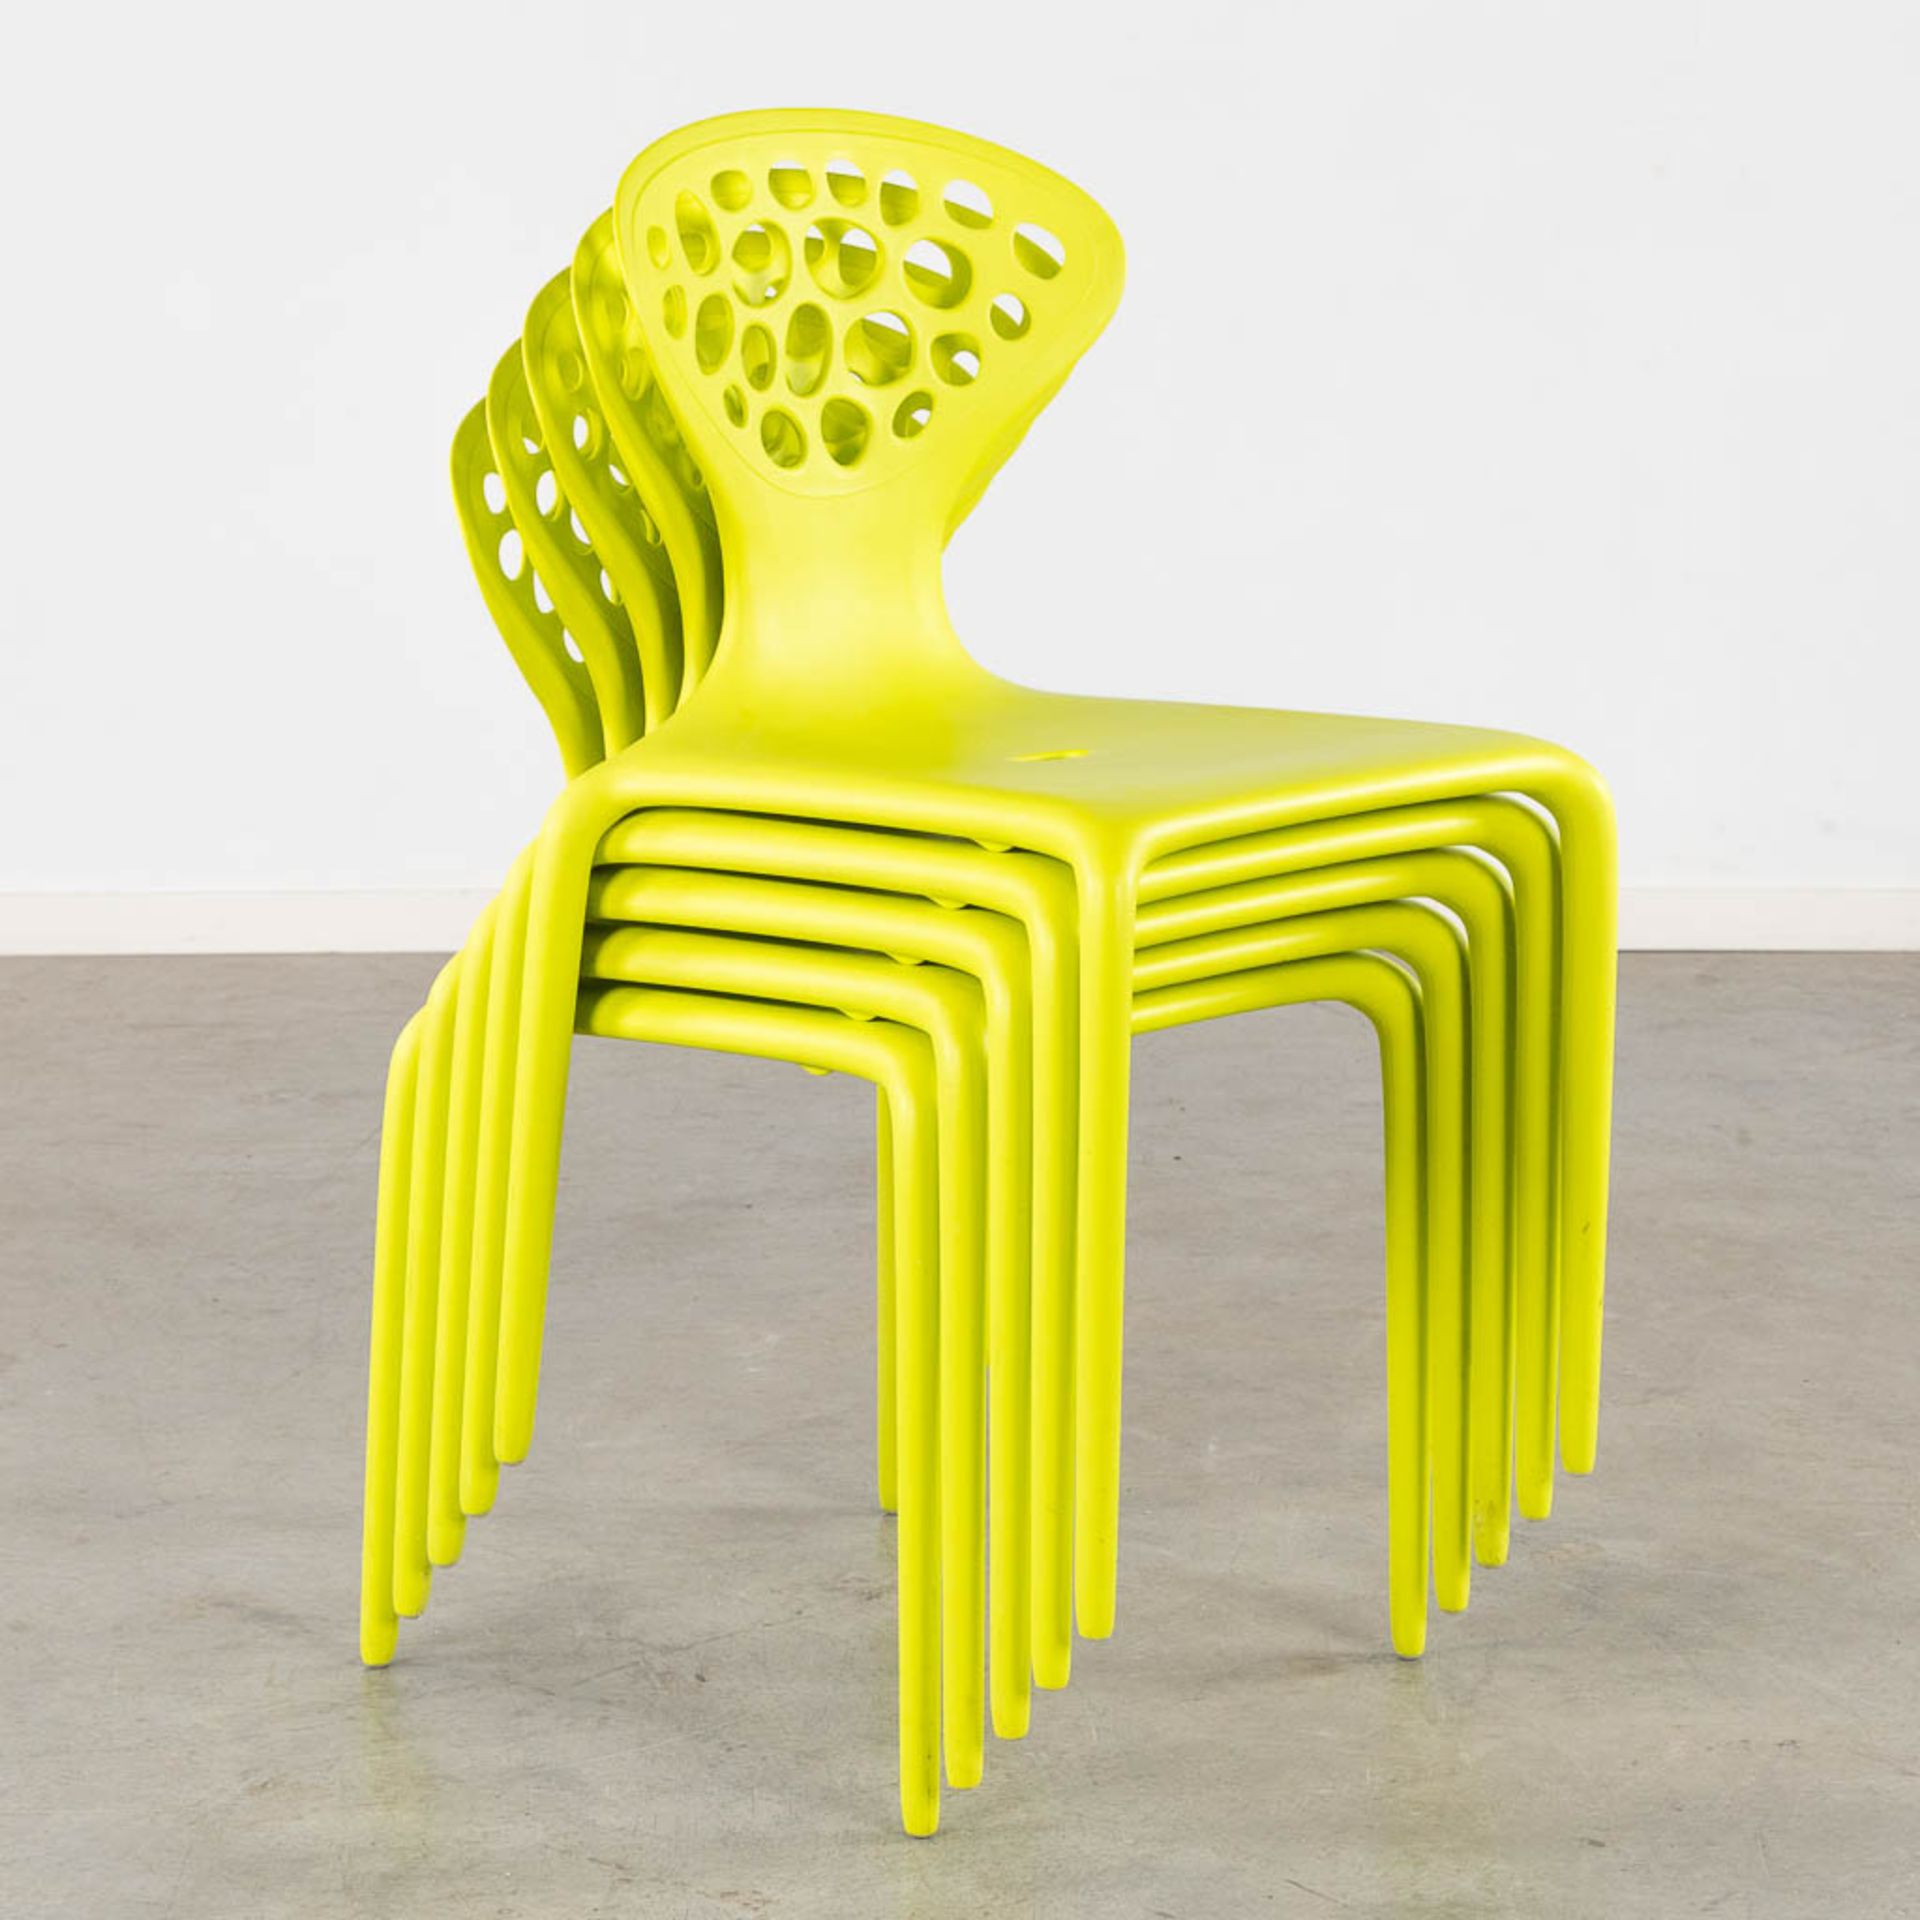 Ross LOVEGROVE (1958) 'Supernatural Chairs' (2005) for Morosso, Italy. (L:48 x W:48 x H:82 cm) - Bild 11 aus 11